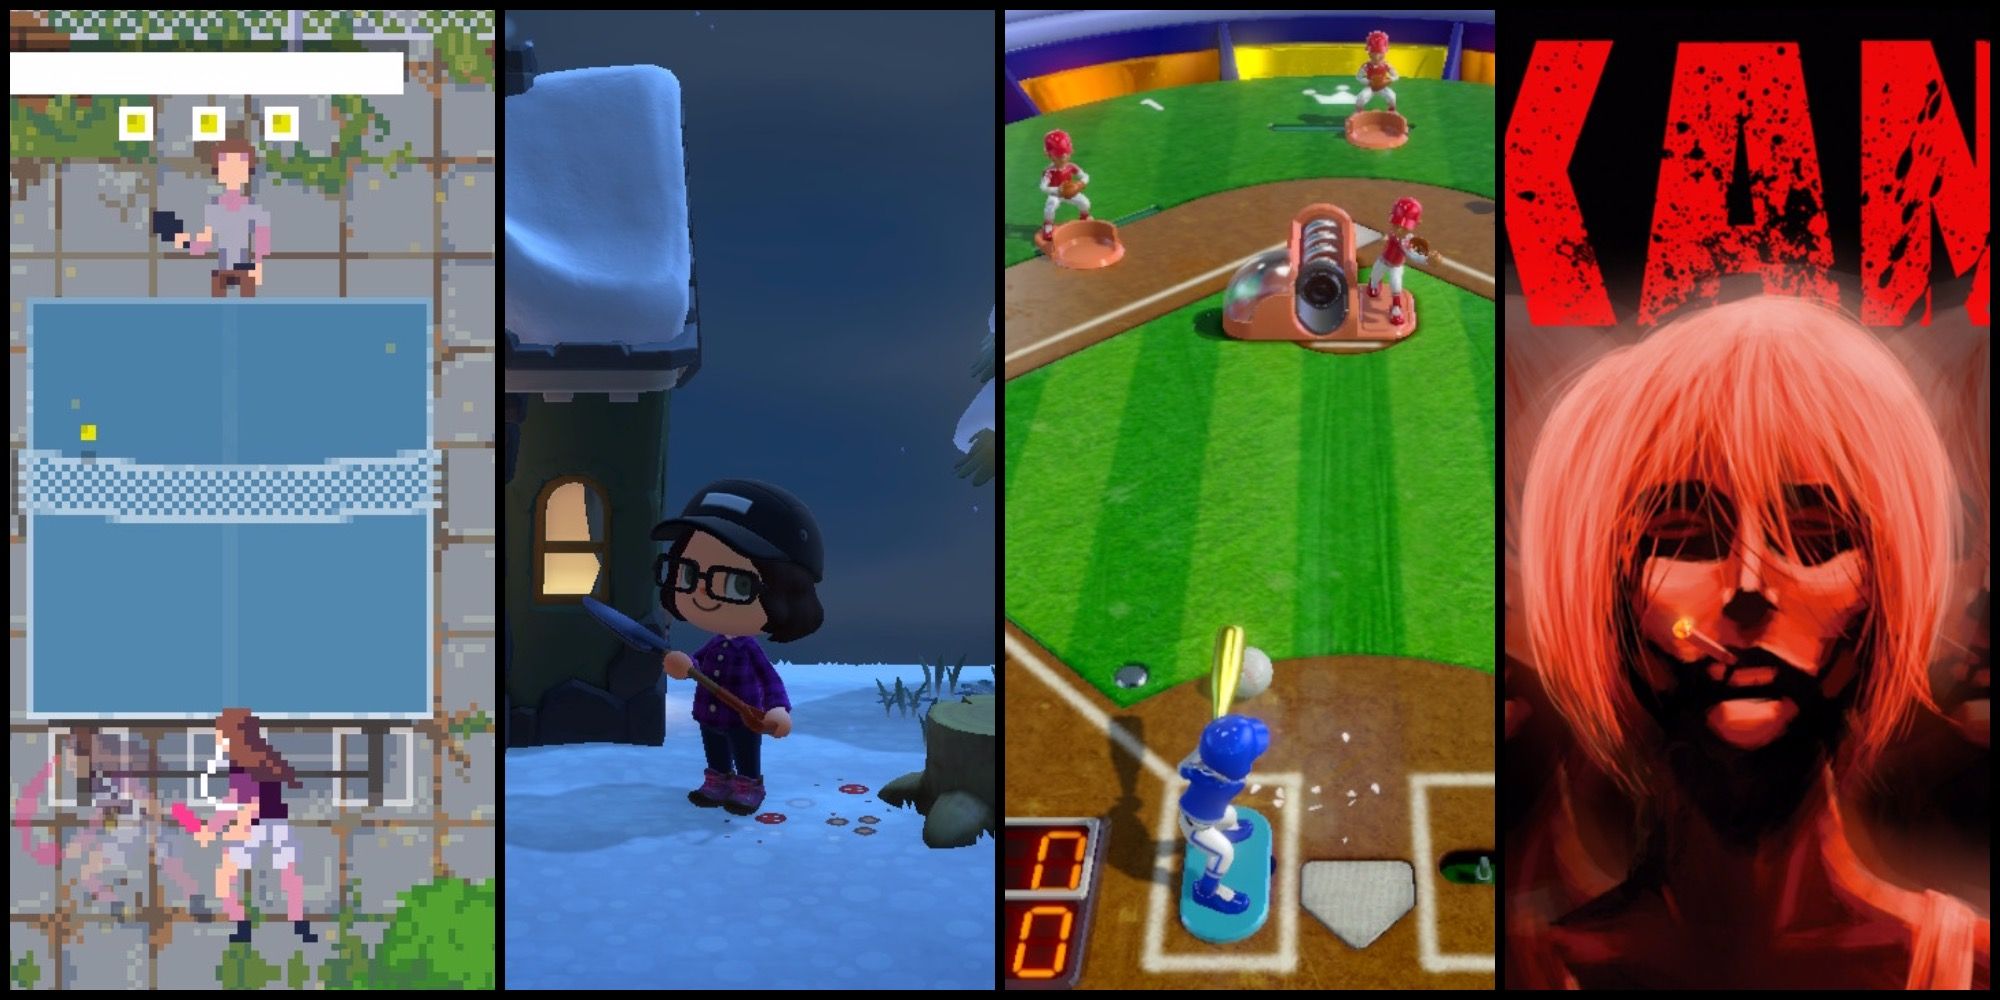 Split image screenshots of Lofi Ping Pong, Animal Crossing New Horizons, Clubhouse Games and Akane. Two people playing ping pong a character holding a shovel a toy baseball game and a character smoking a cigarette